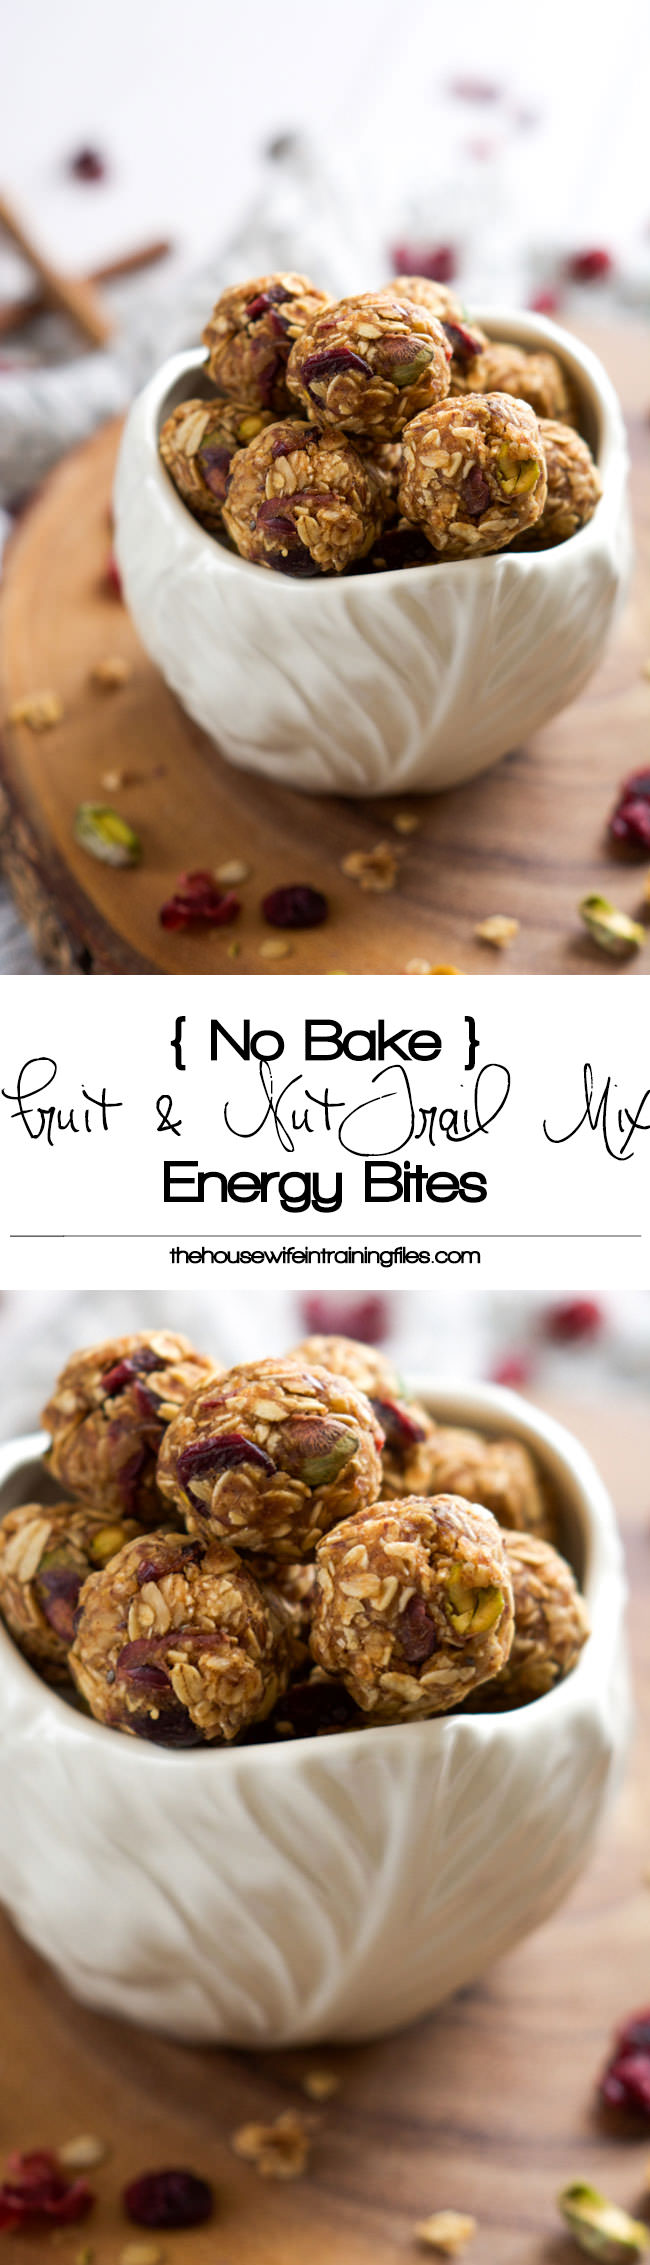 Quick and healthy no bake Fruit and Nut Trail Mix Energy Balls are loaded with dried cranberries, oats and pistachios for a nutritious breakfast or snack on the go! #energyballs #glutenfree #snacks #healthy